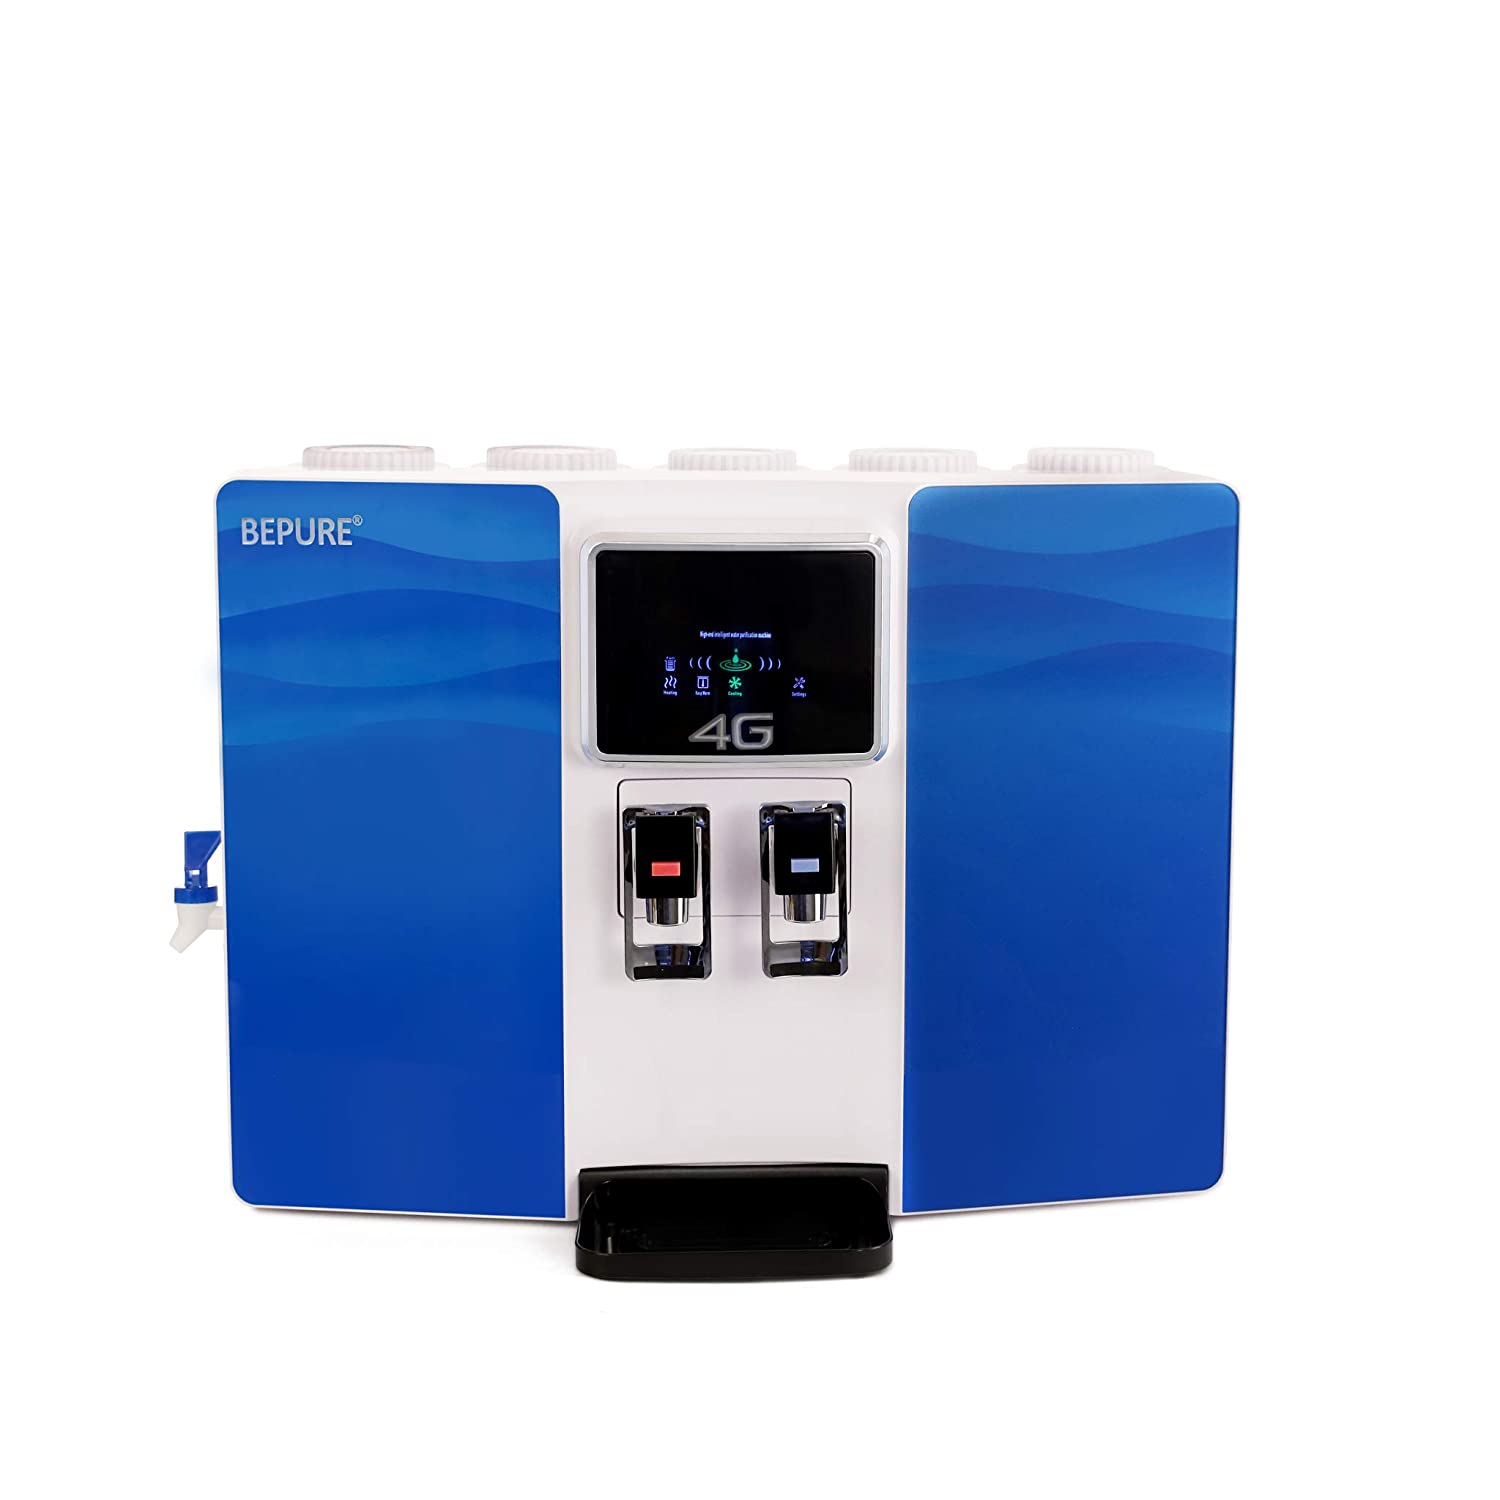 Bepure hot and cold water purifier